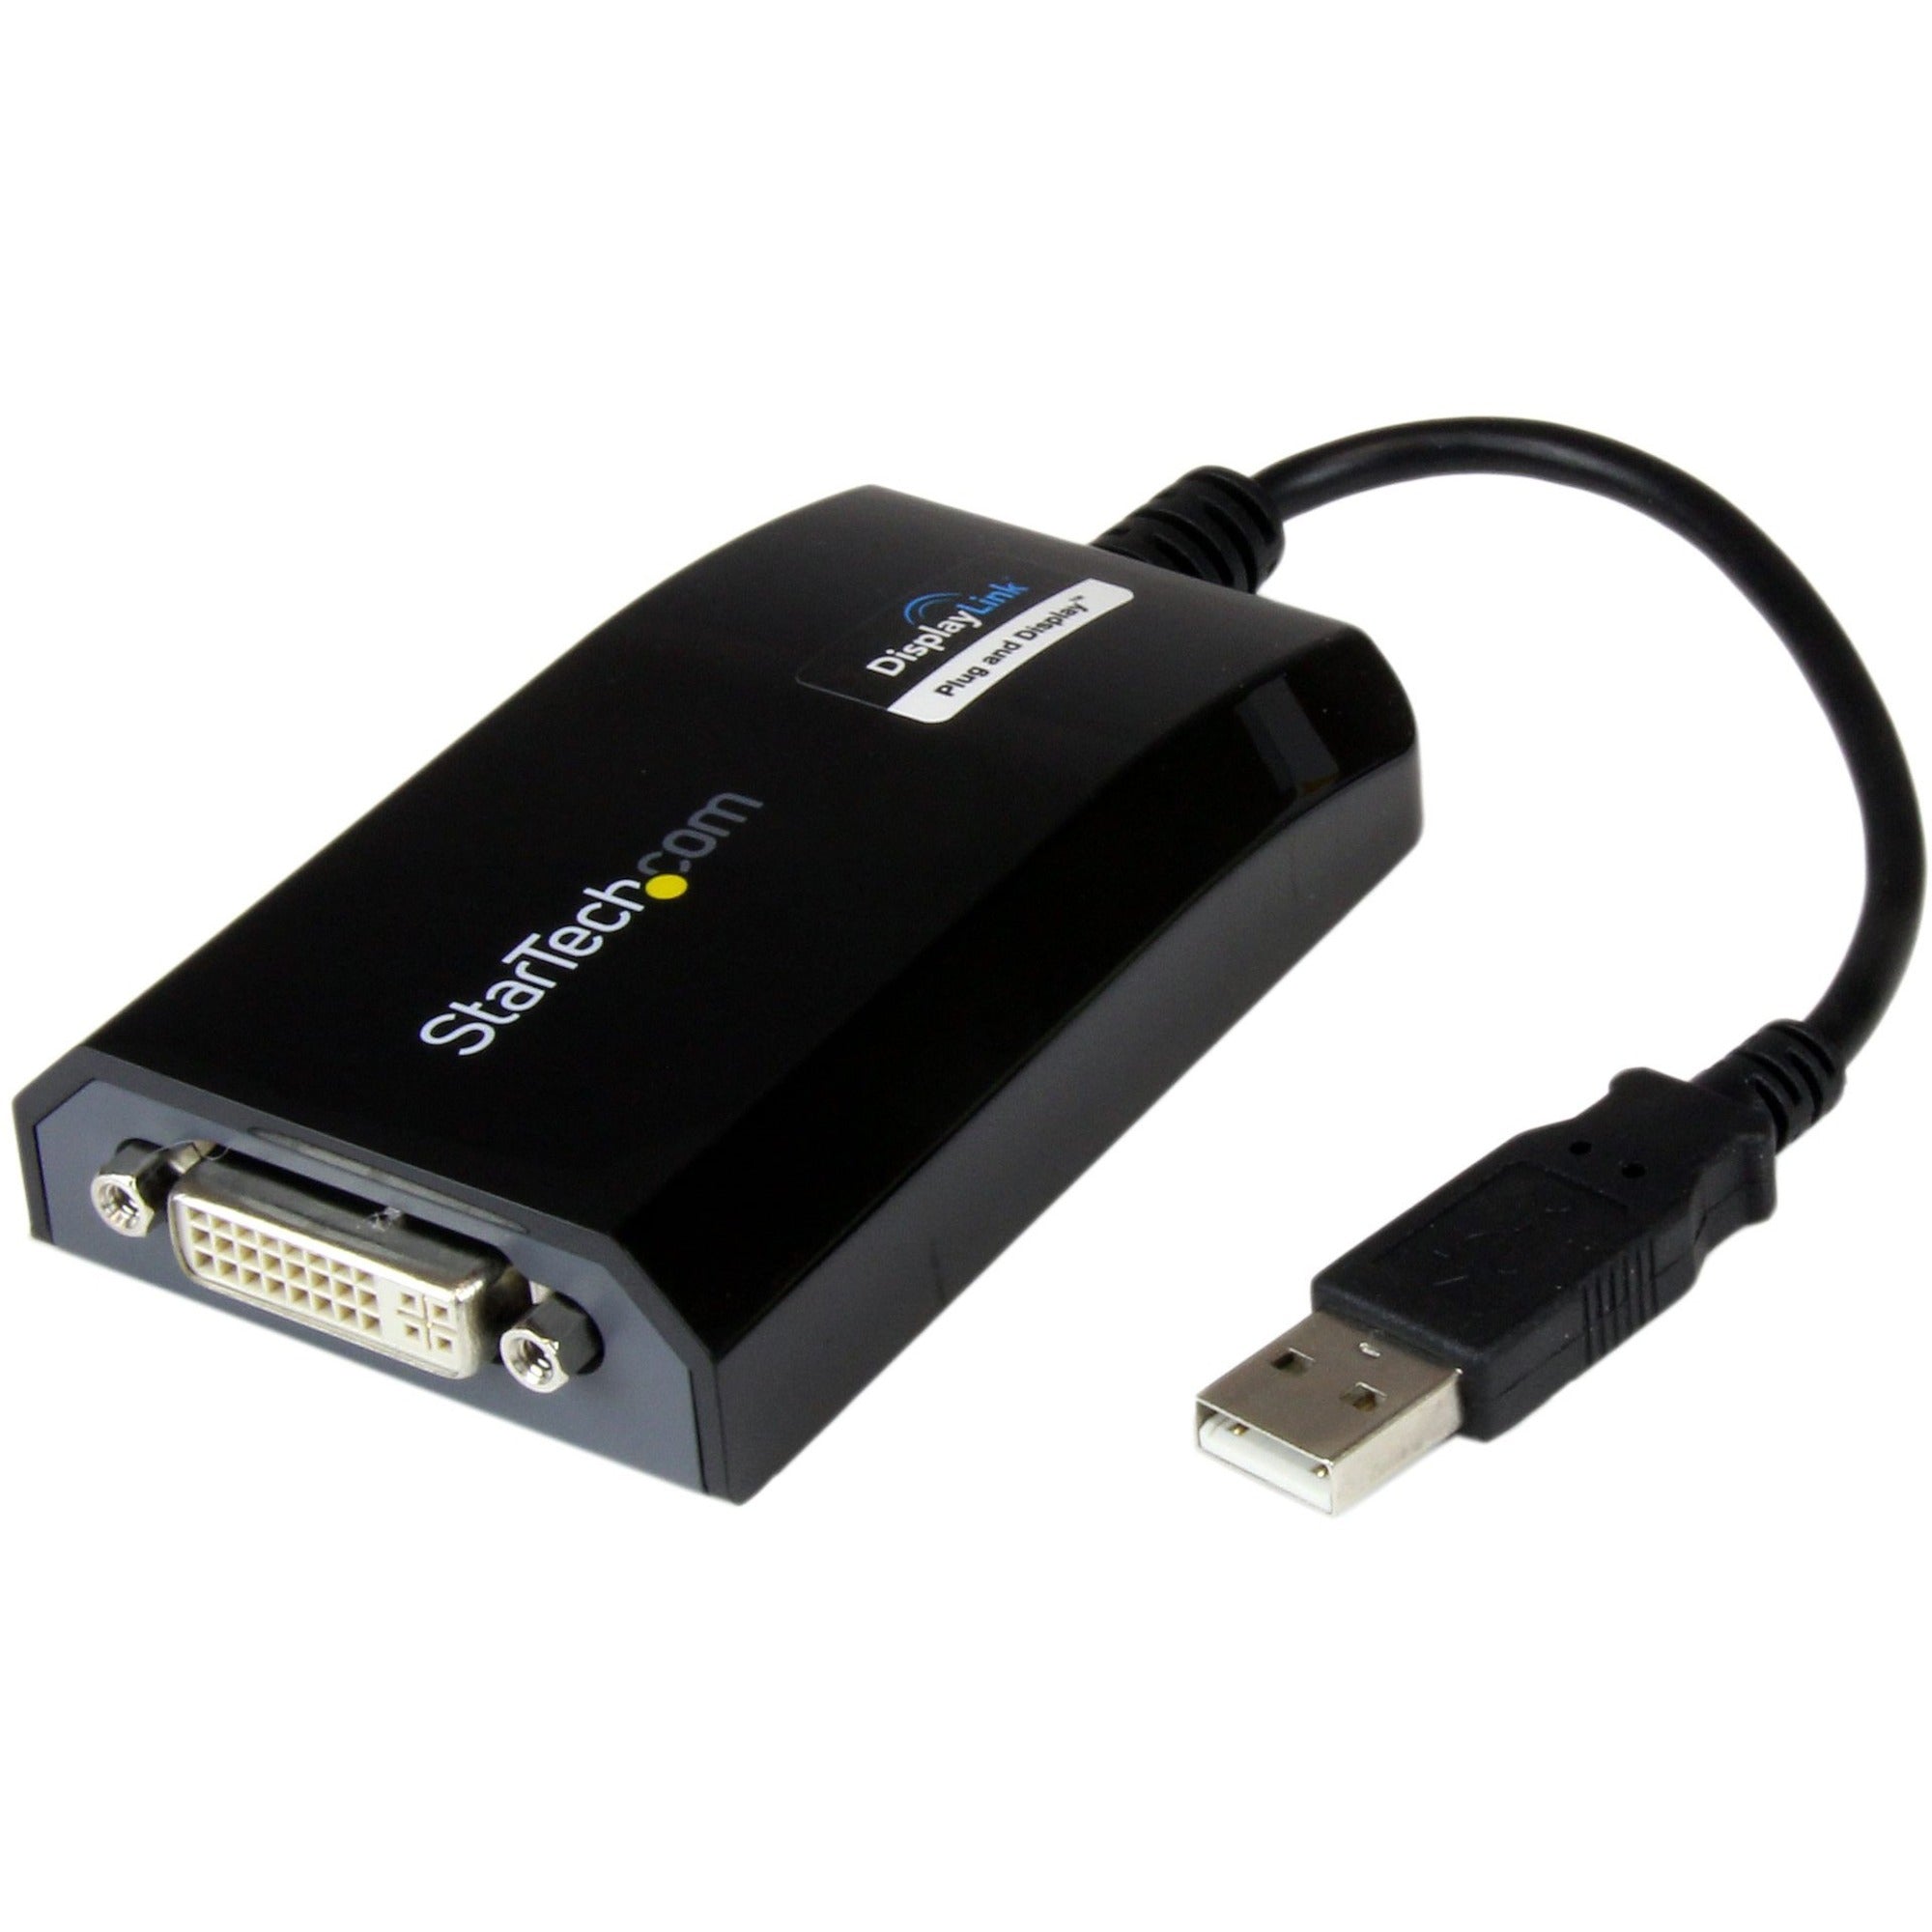 StarTech.com USB to DVI Adapter - External USB Video Graphics Card for PC and MAC- 1920x1200 - USB2DVIPRO2